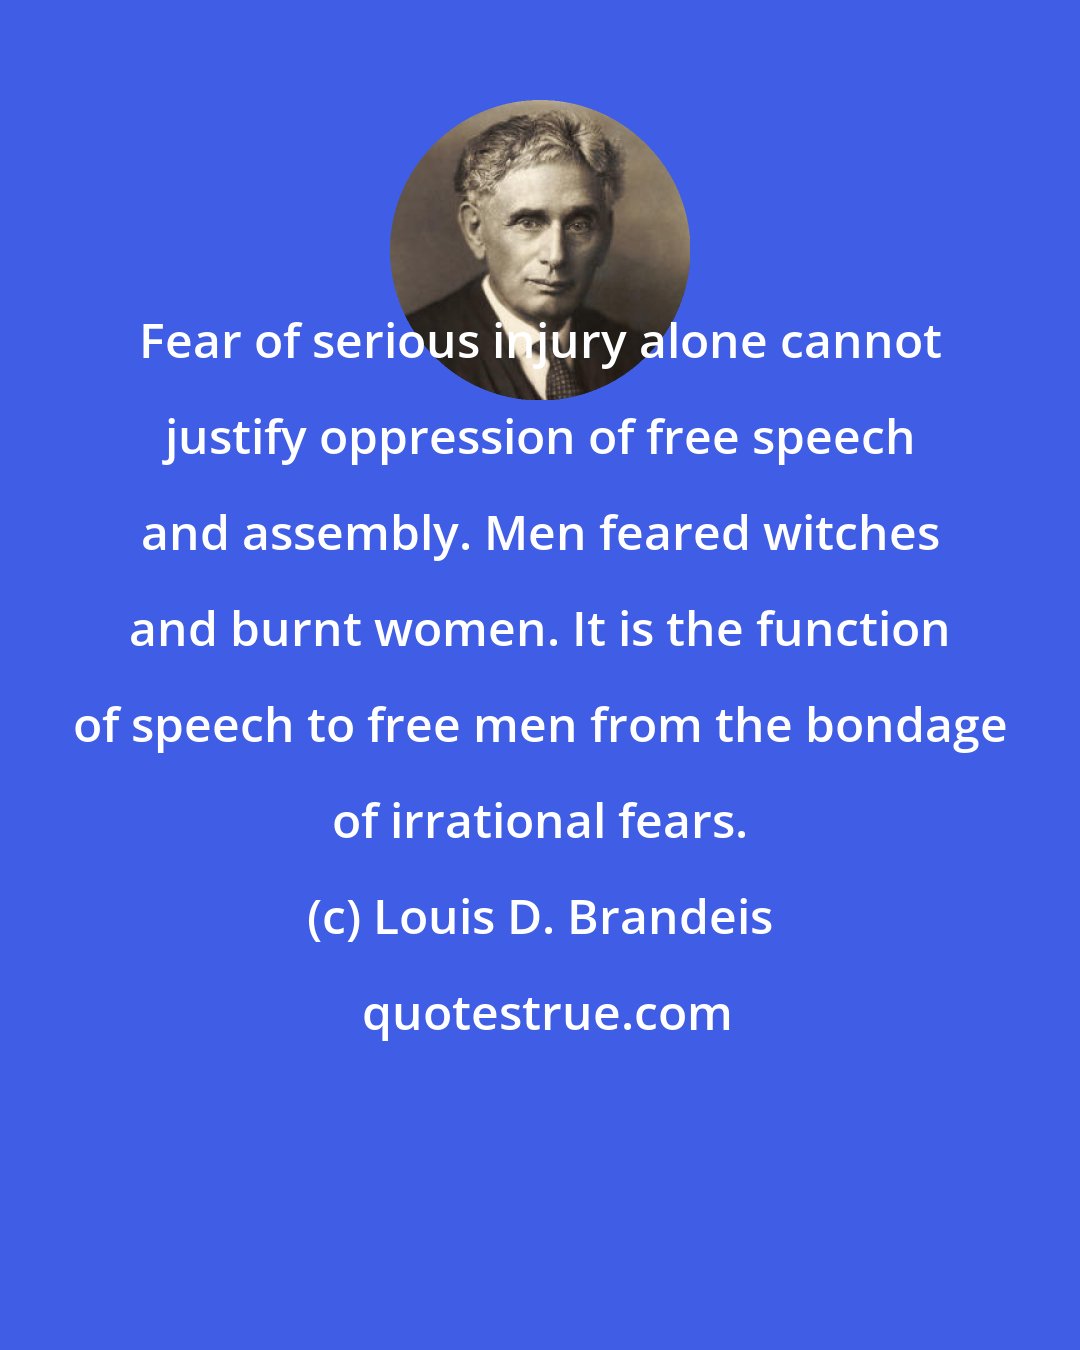 Louis D. Brandeis: Fear of serious injury alone cannot justify oppression of free speech and assembly. Men feared witches and burnt women. It is the function of speech to free men from the bondage of irrational fears.